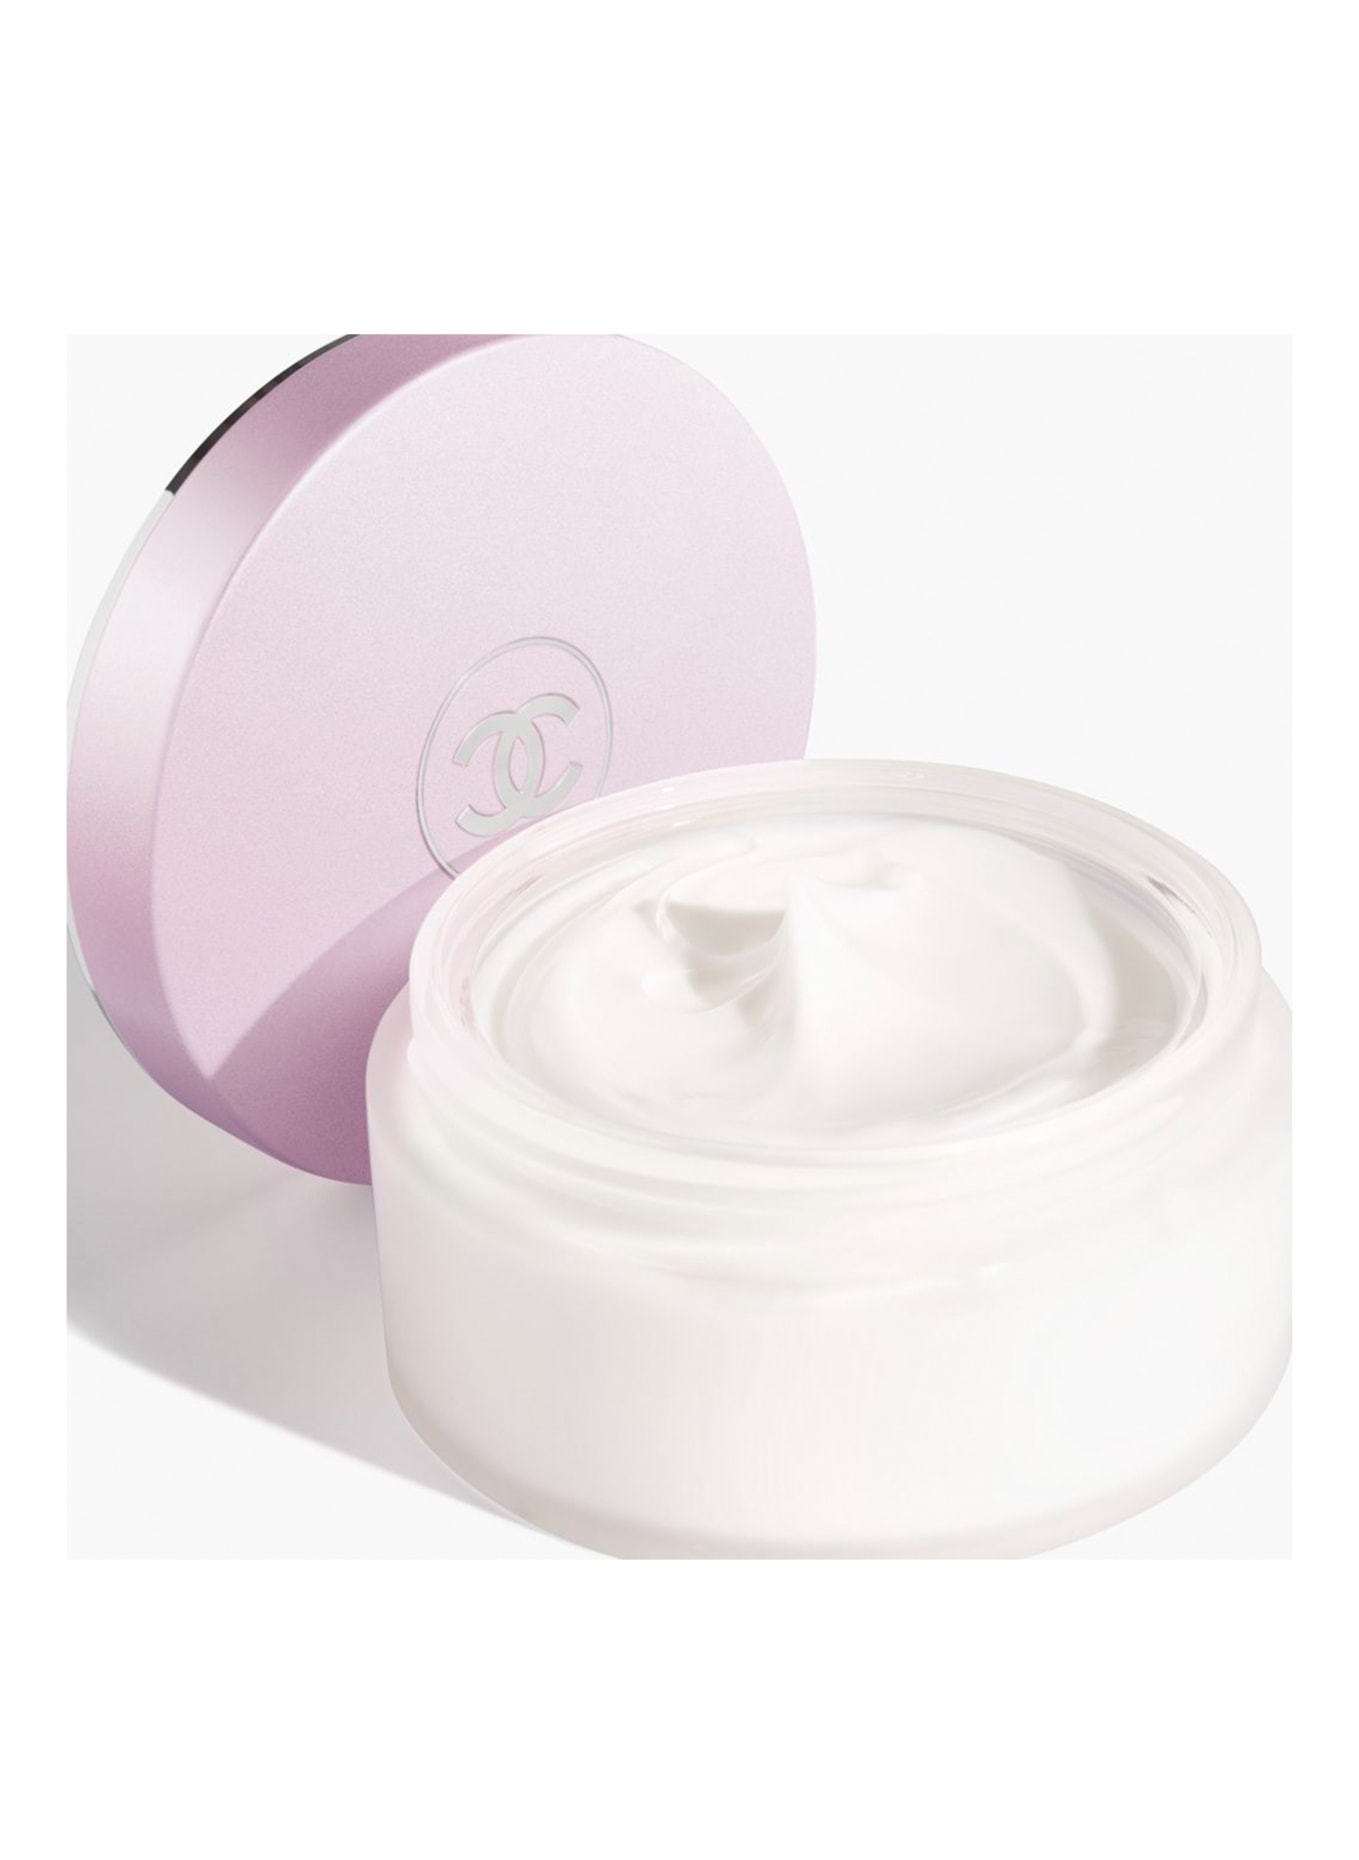 Chanel Body Cream Smells Like Your Favorite Chance Fragrance – StyleCaster